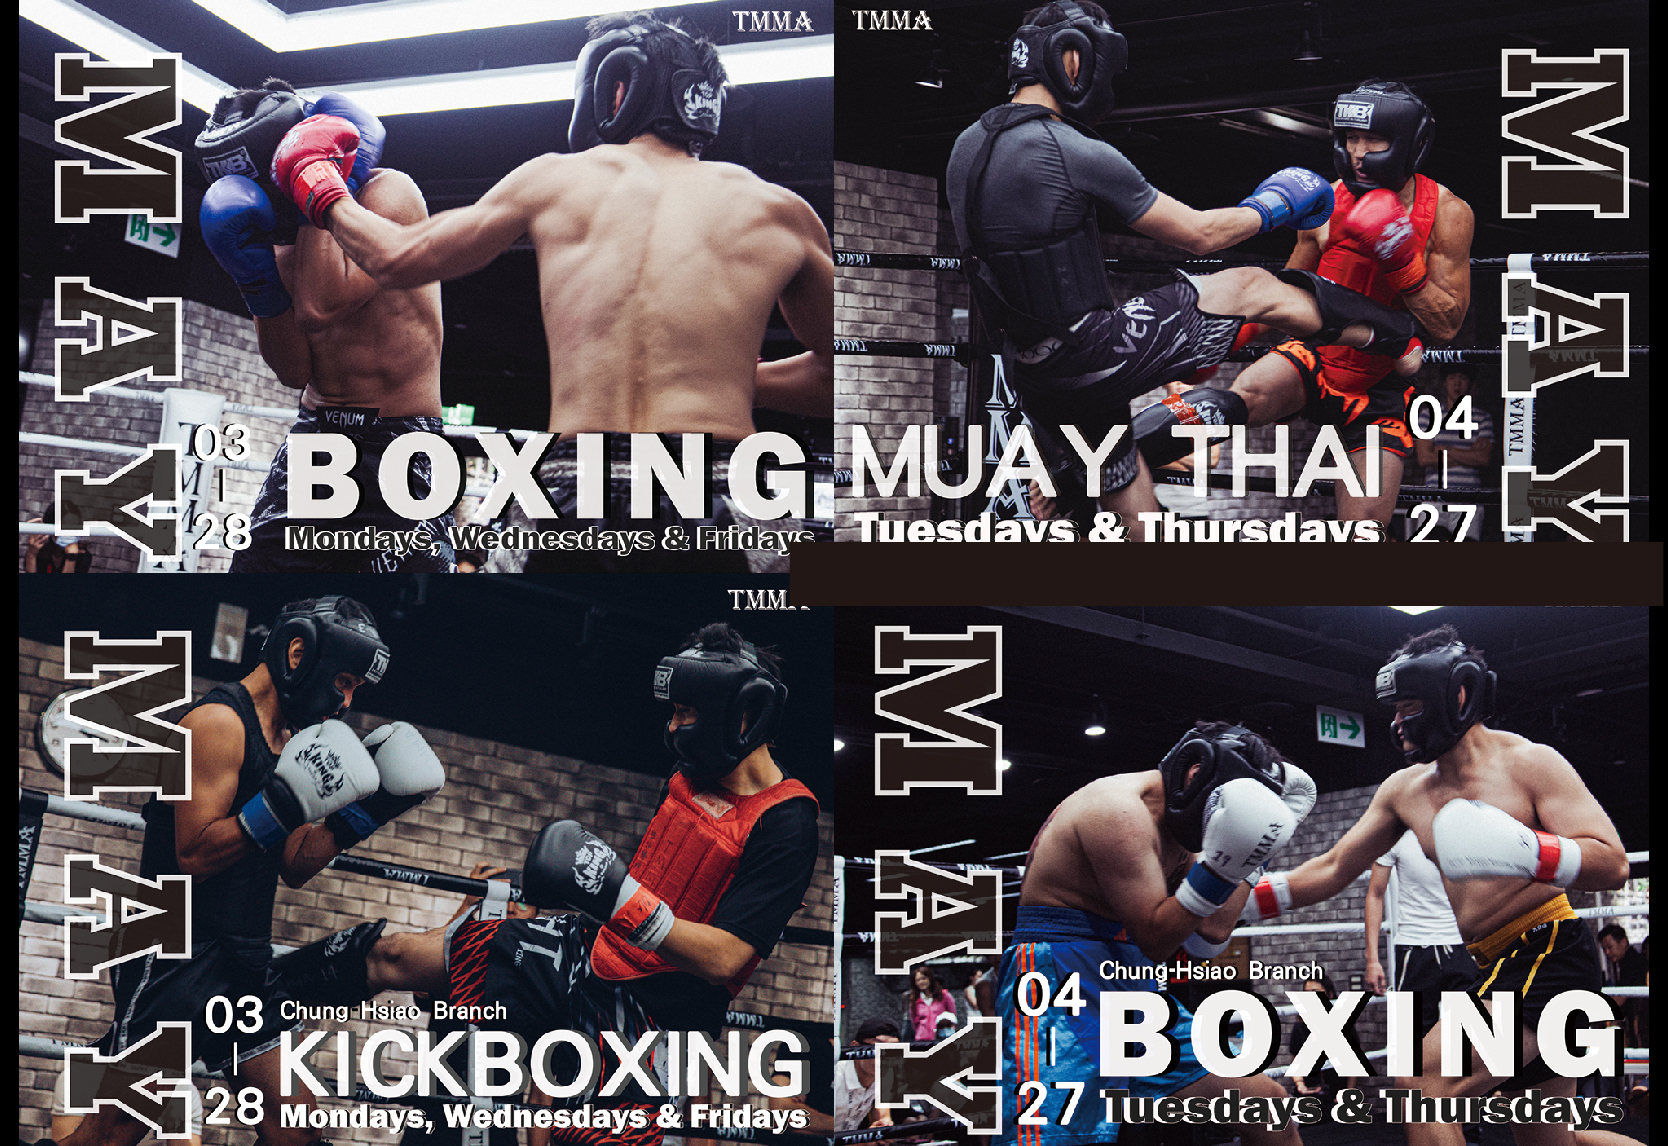 TMMA May Morning Intensive Class